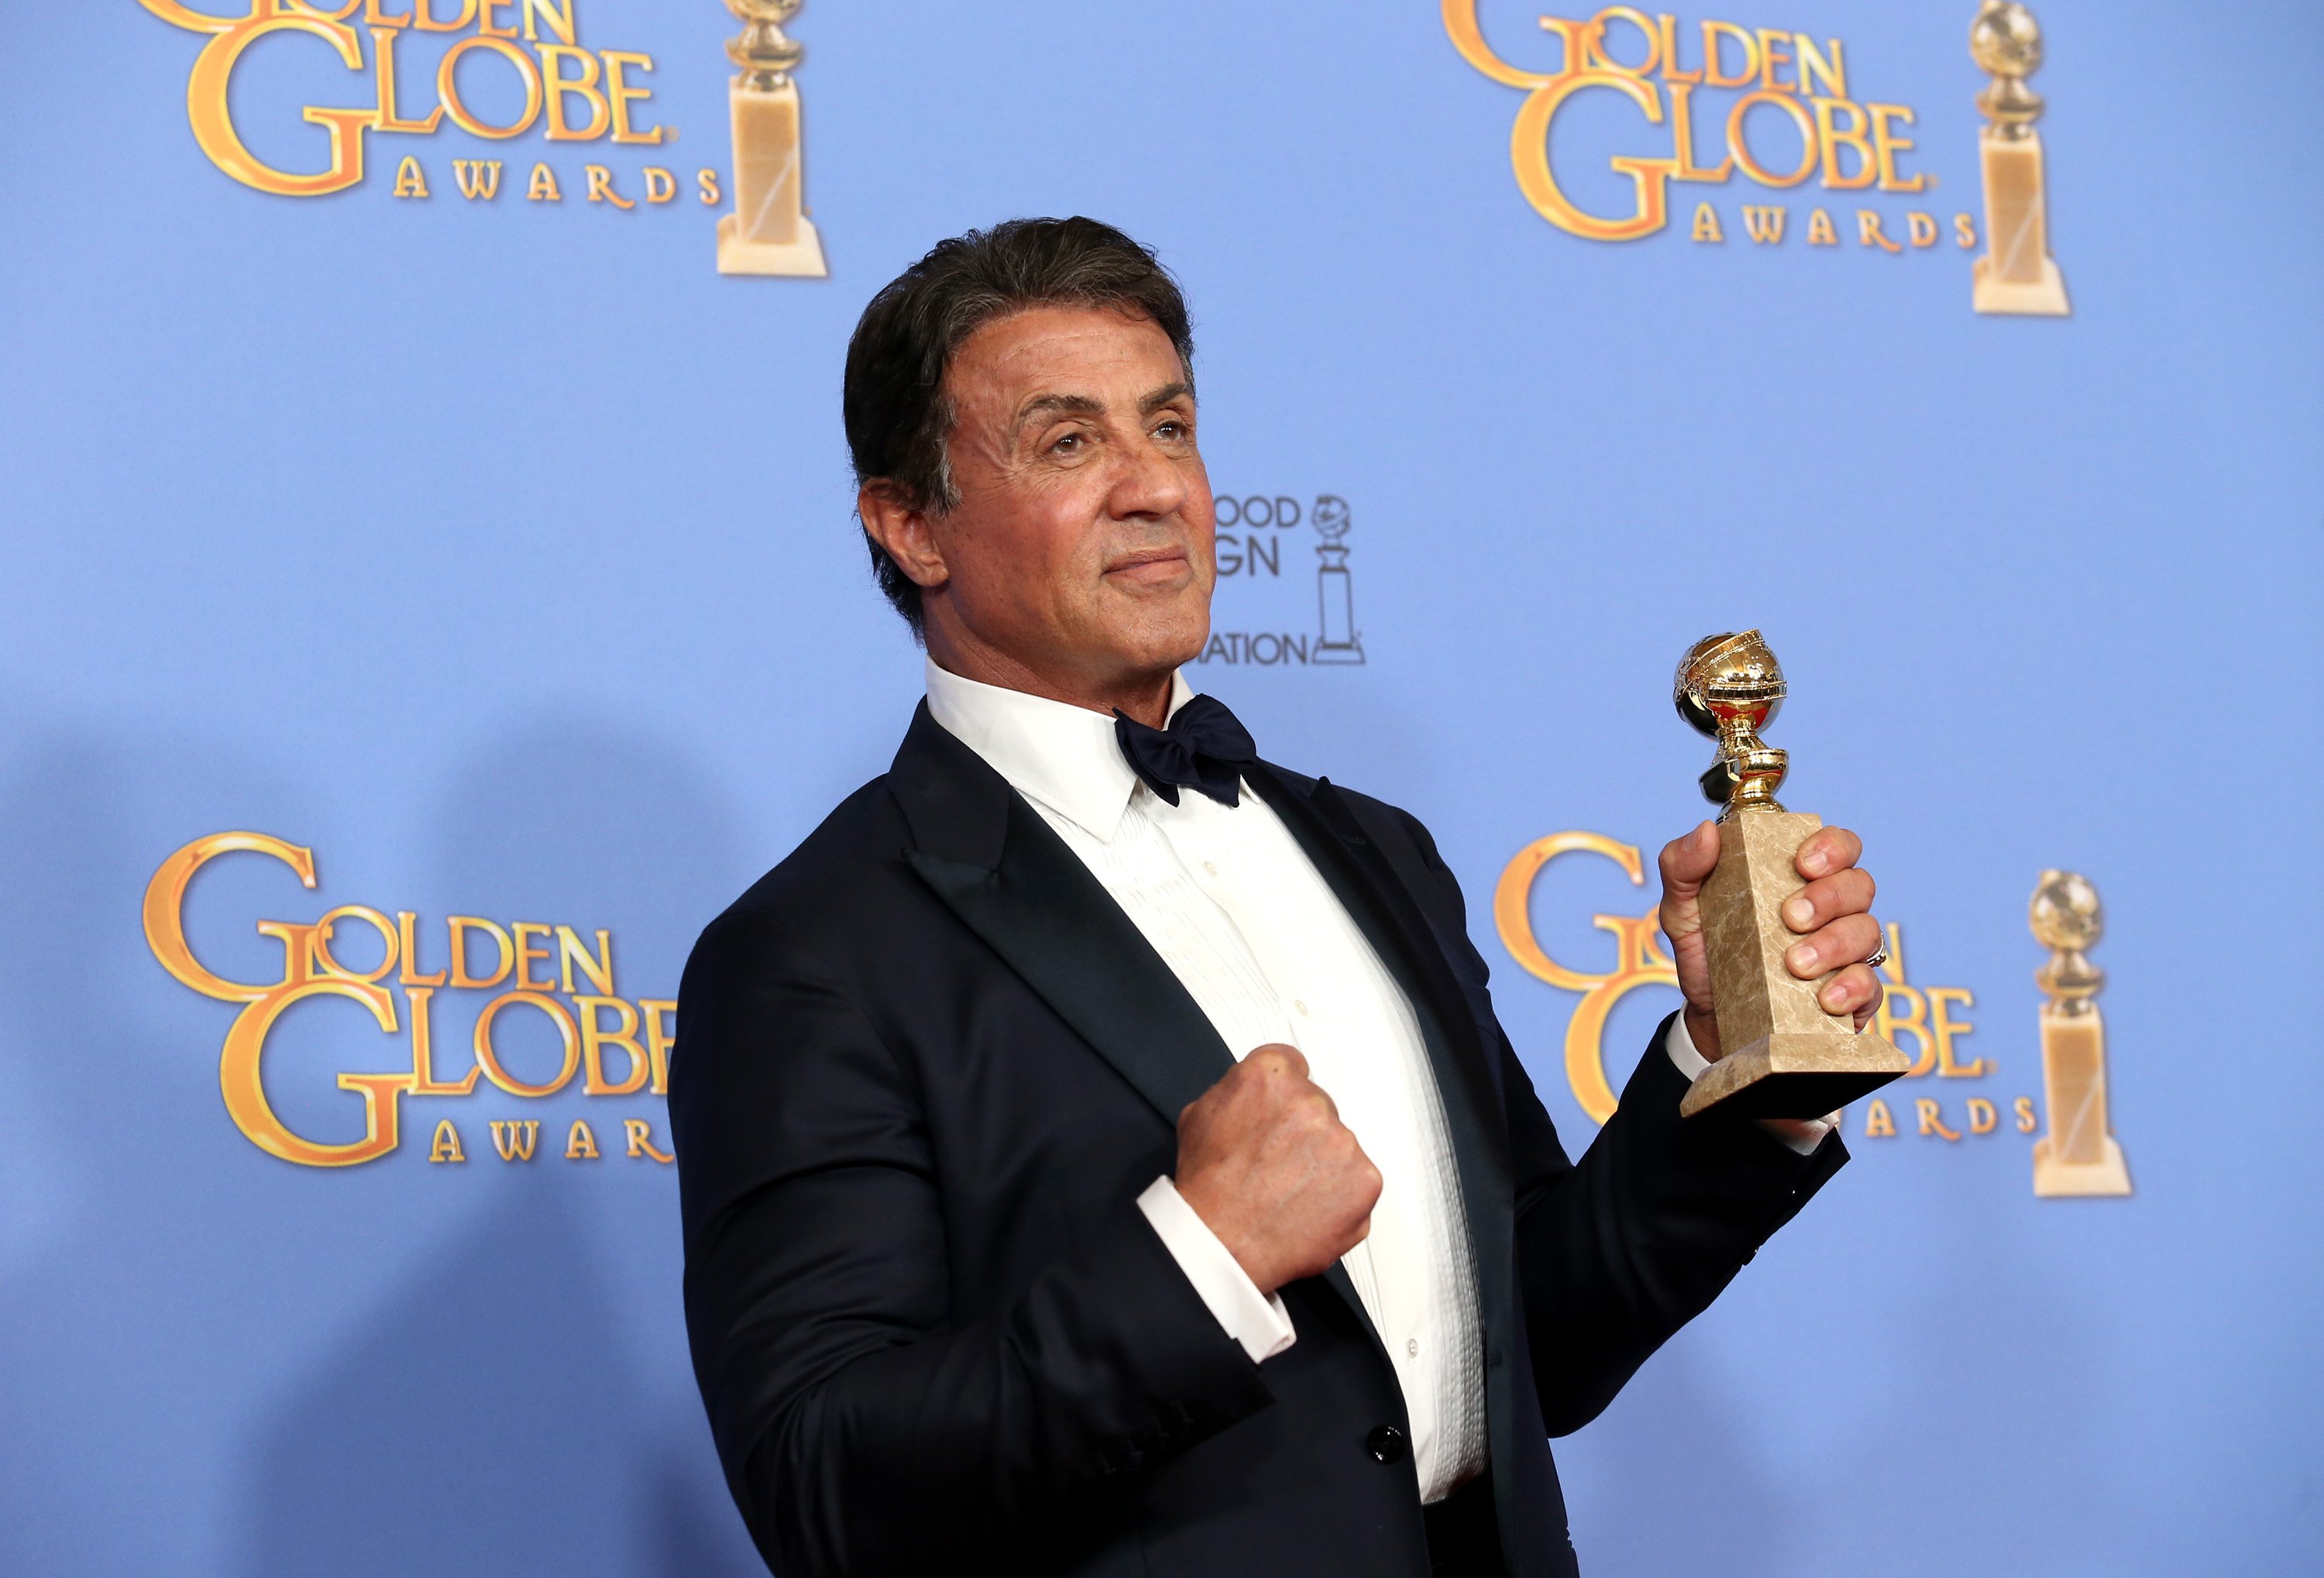 Sylvester Stallone at the 73rd Annual Golden Globe Awards, Press Room in Los Angeles on Jan.10, 2016. (Jim Smeal—BEI/Shutterstock)